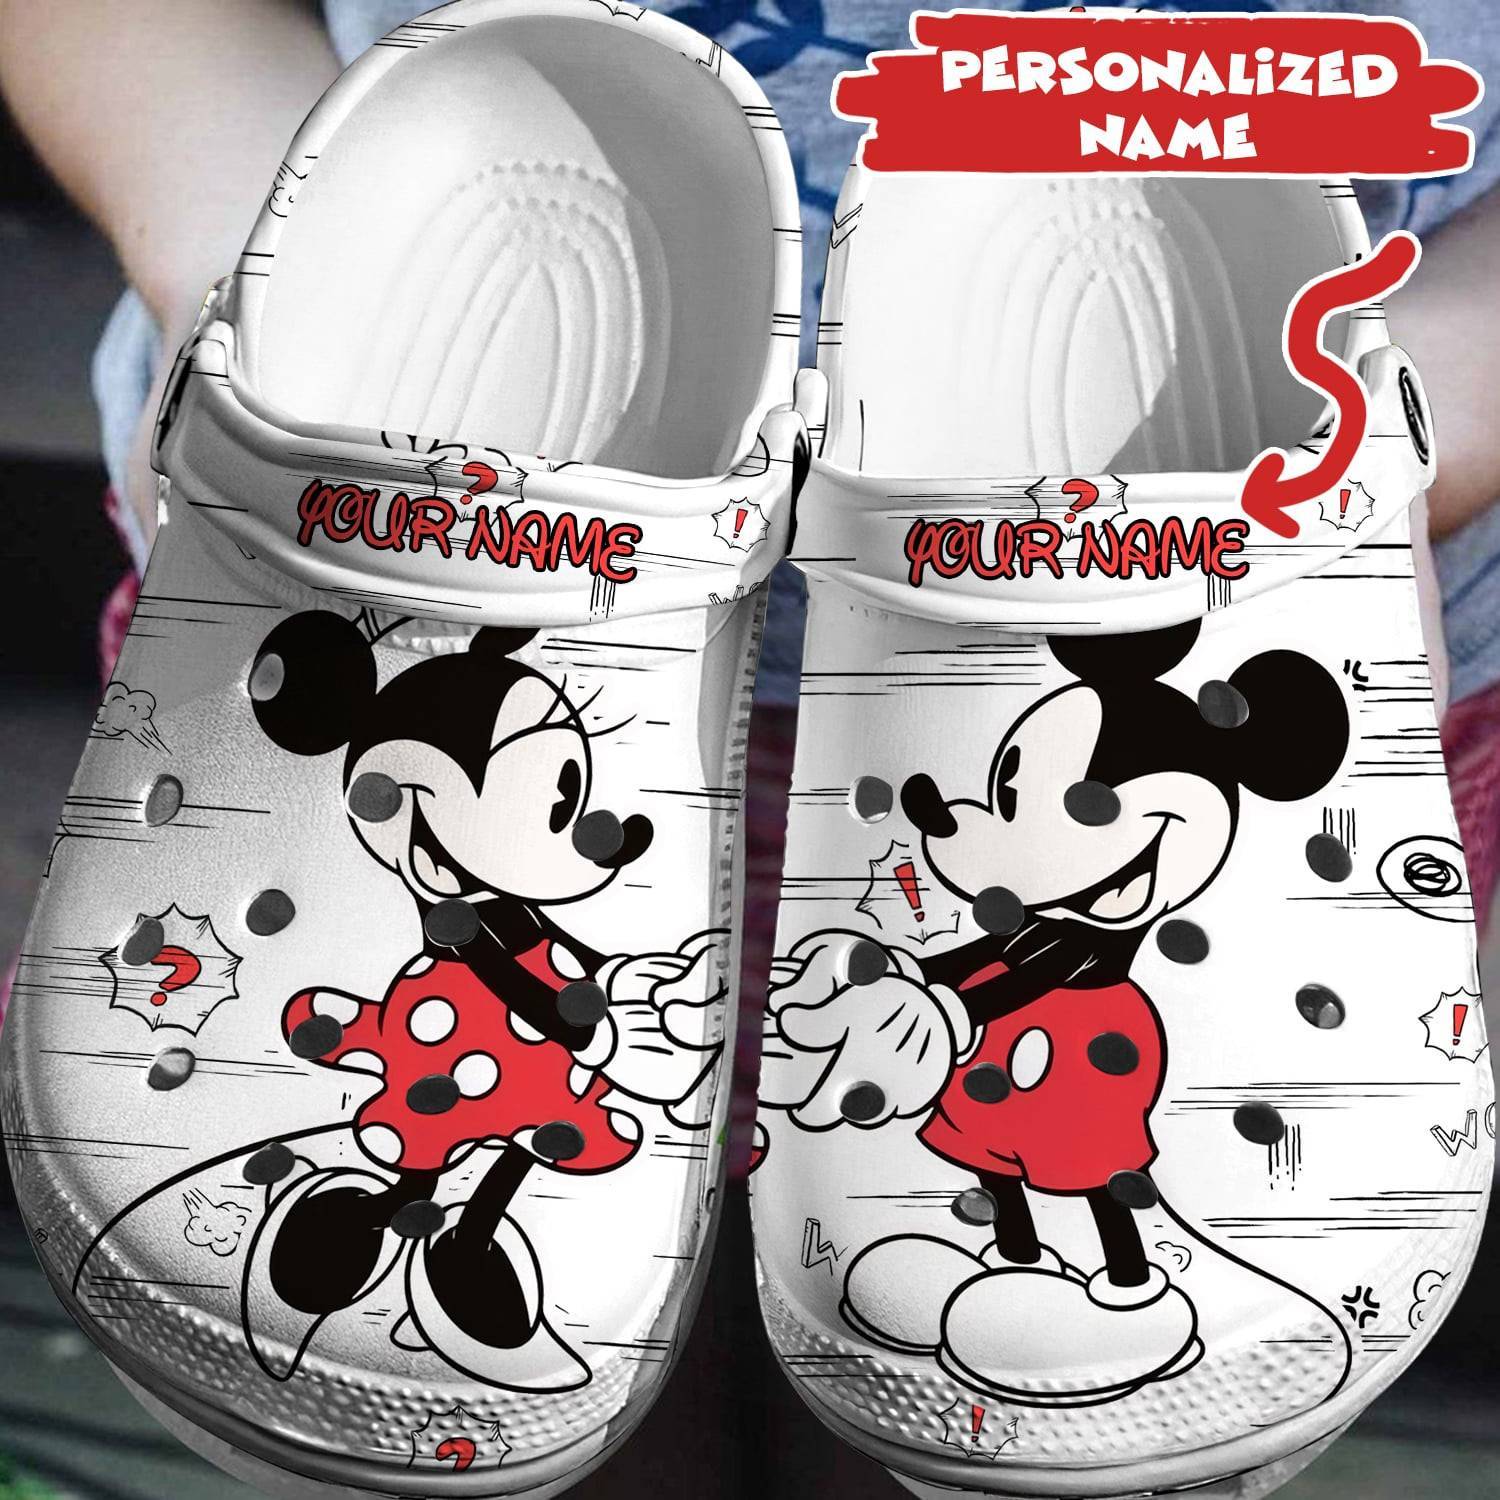 Disney Fantasies Made Real: Personalized Mickey Minnie Crocs 3D Clog Shoes